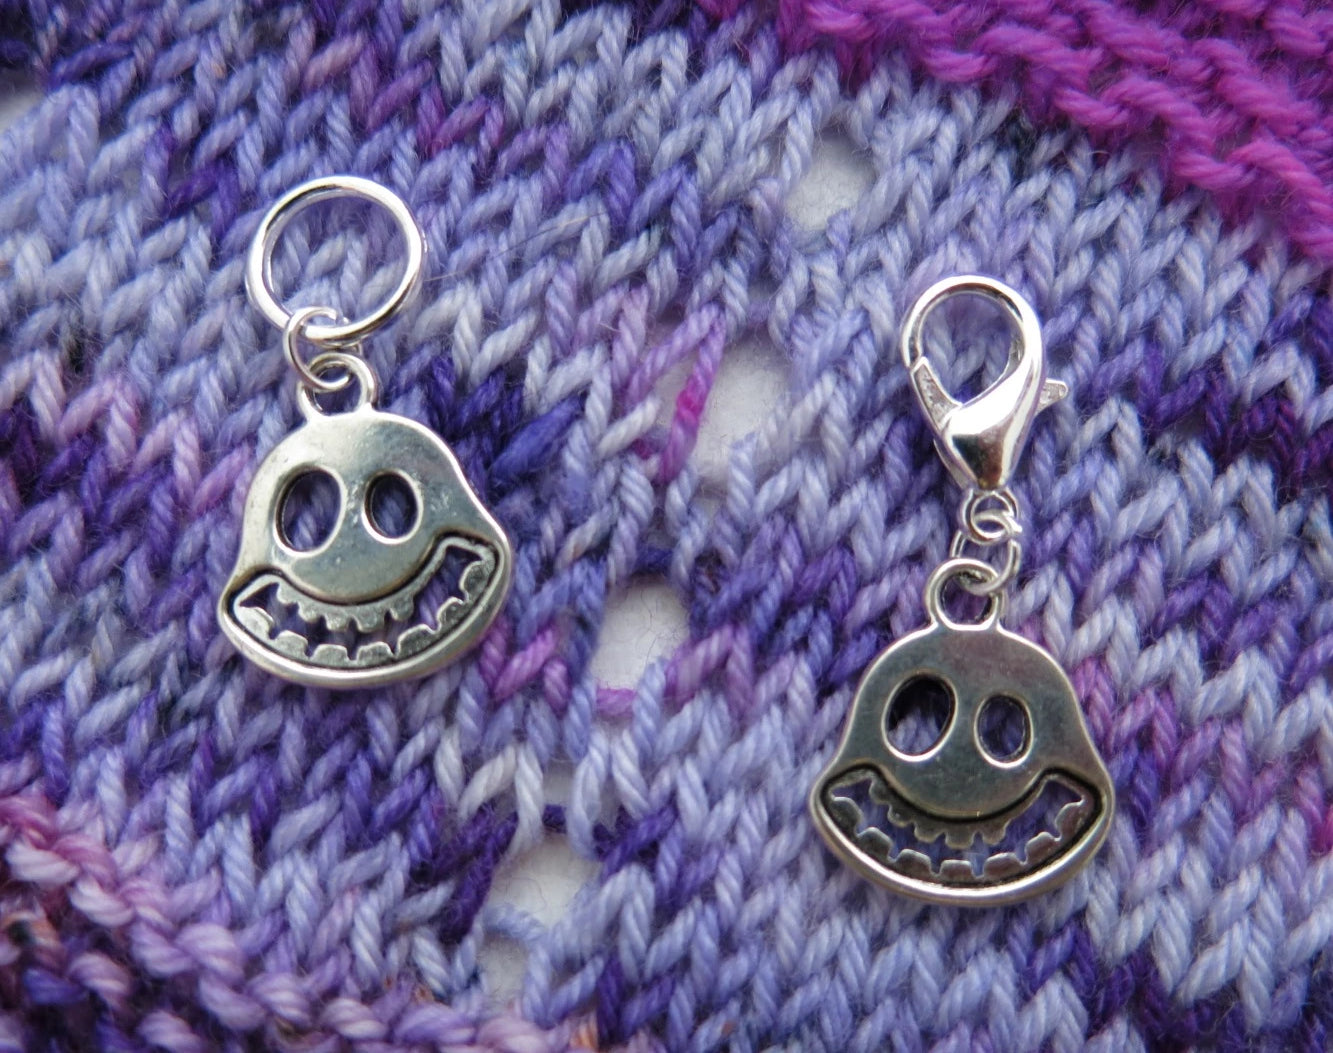 silver coloured smiling ghost face charms on lobster clasps for knitting and crochet